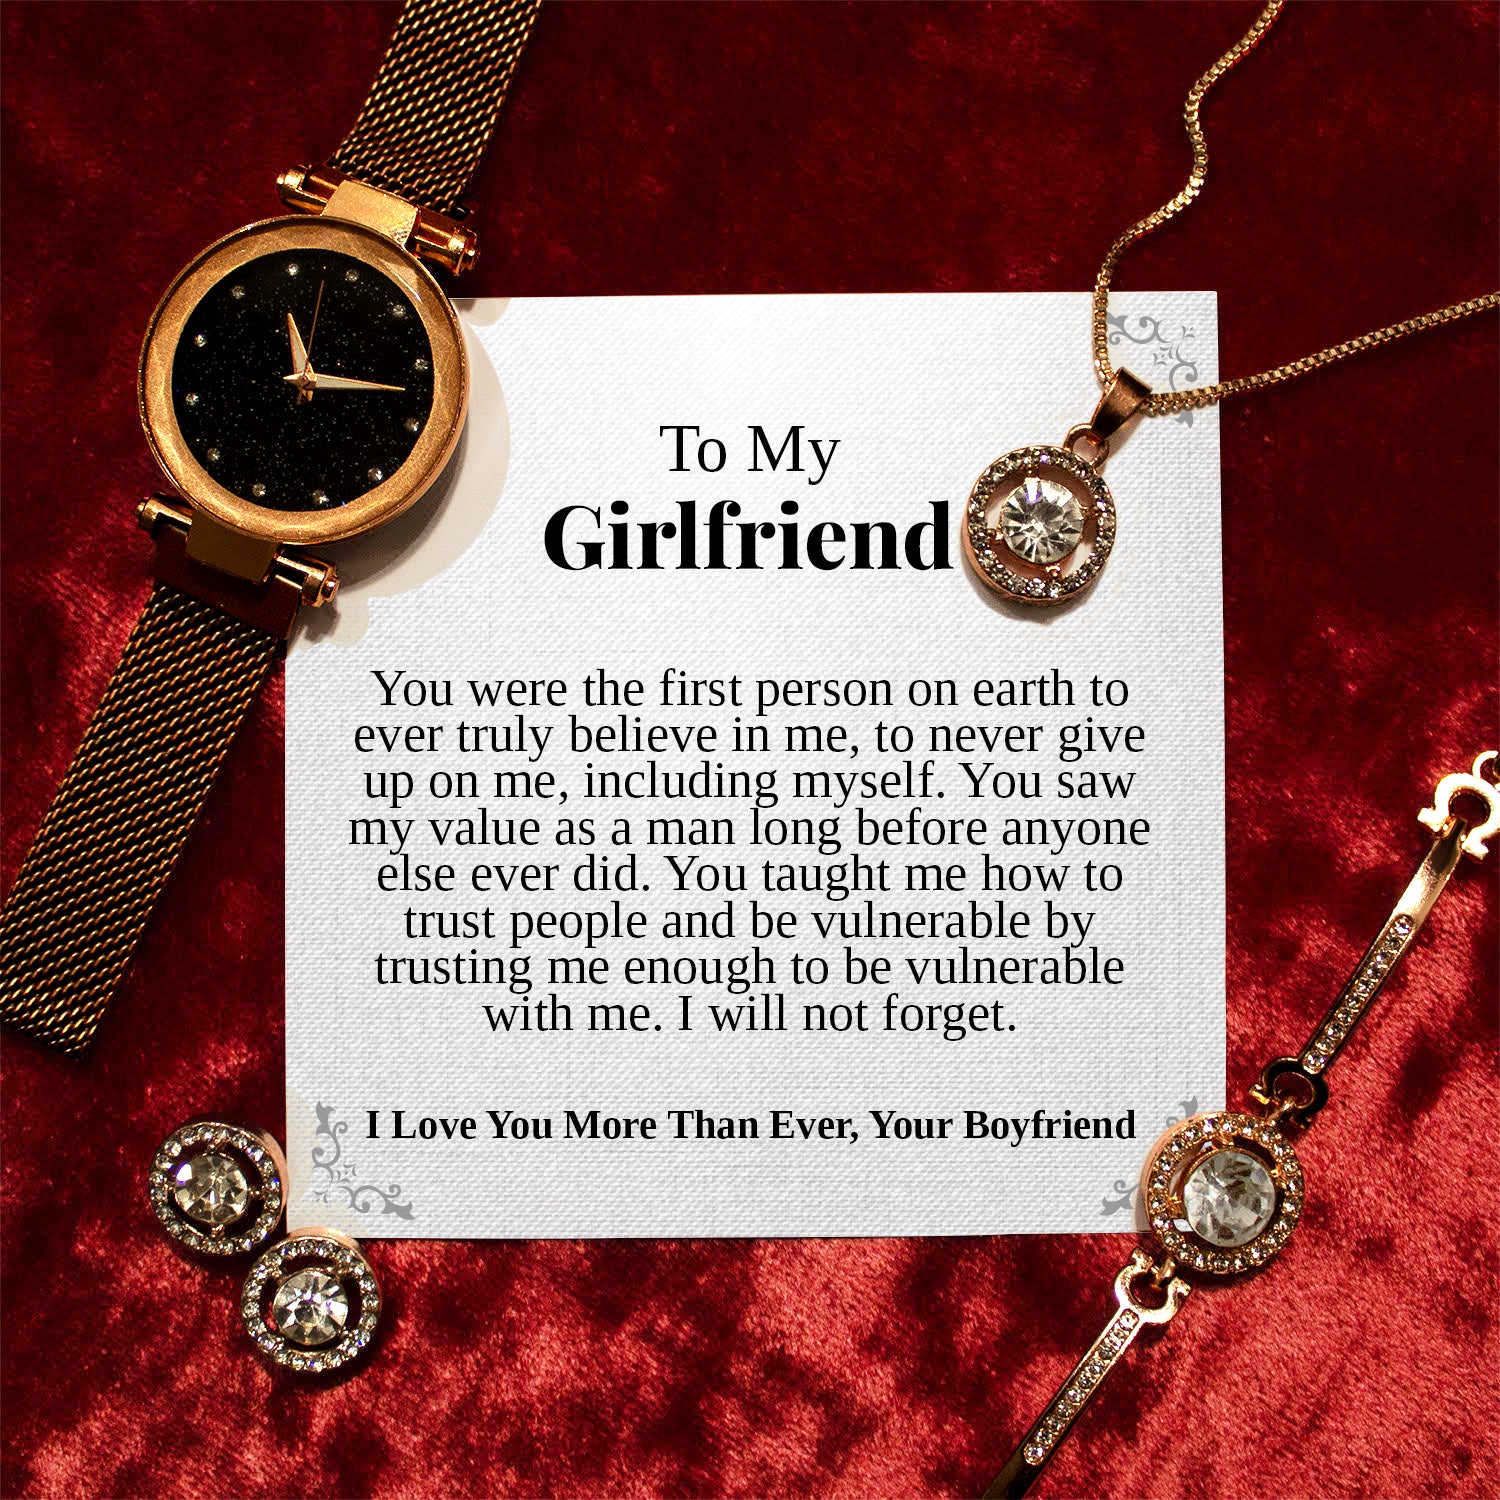 To My Girlfriend | “The First Person” | Cosmopolitan Set